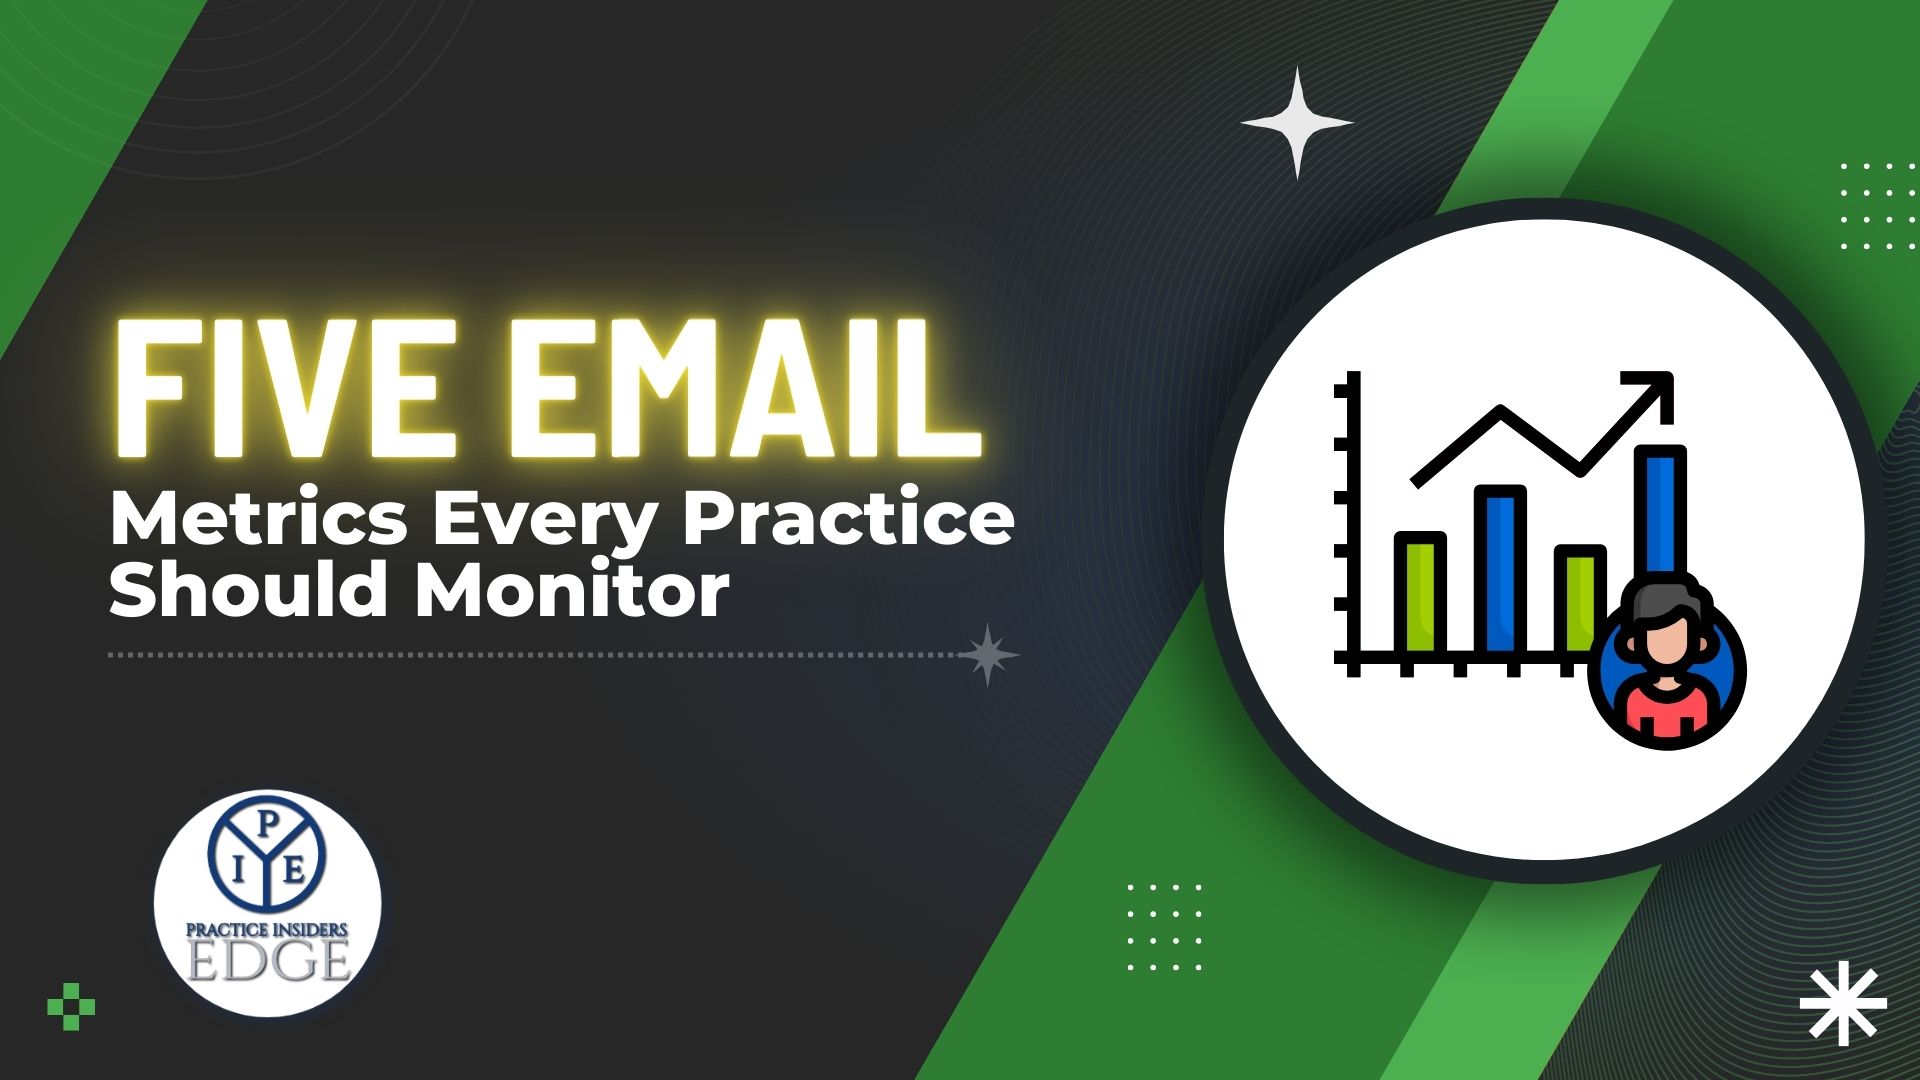 Five Email Metrics Every Practice Should Monitor